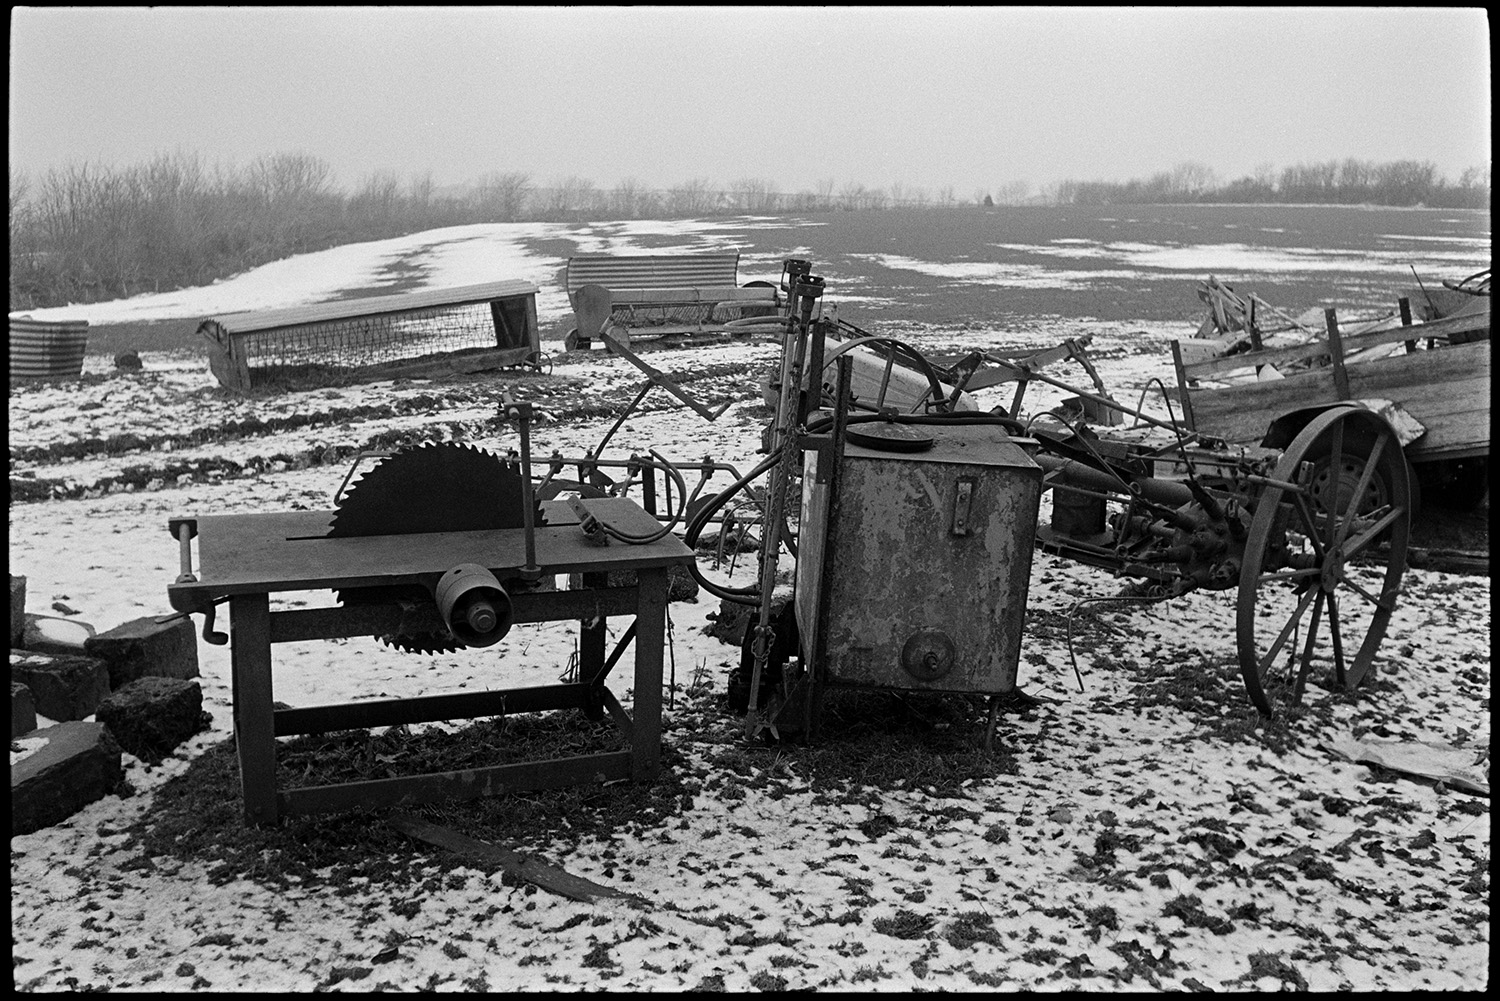 Snow, old rusting implements lying in field, plough, circular saw, reap and binder.
[Circular saw bench, pieces of old farming equipment and hay feeders in a field lightly covered with snow at Ashwell Farm, Dolton.]